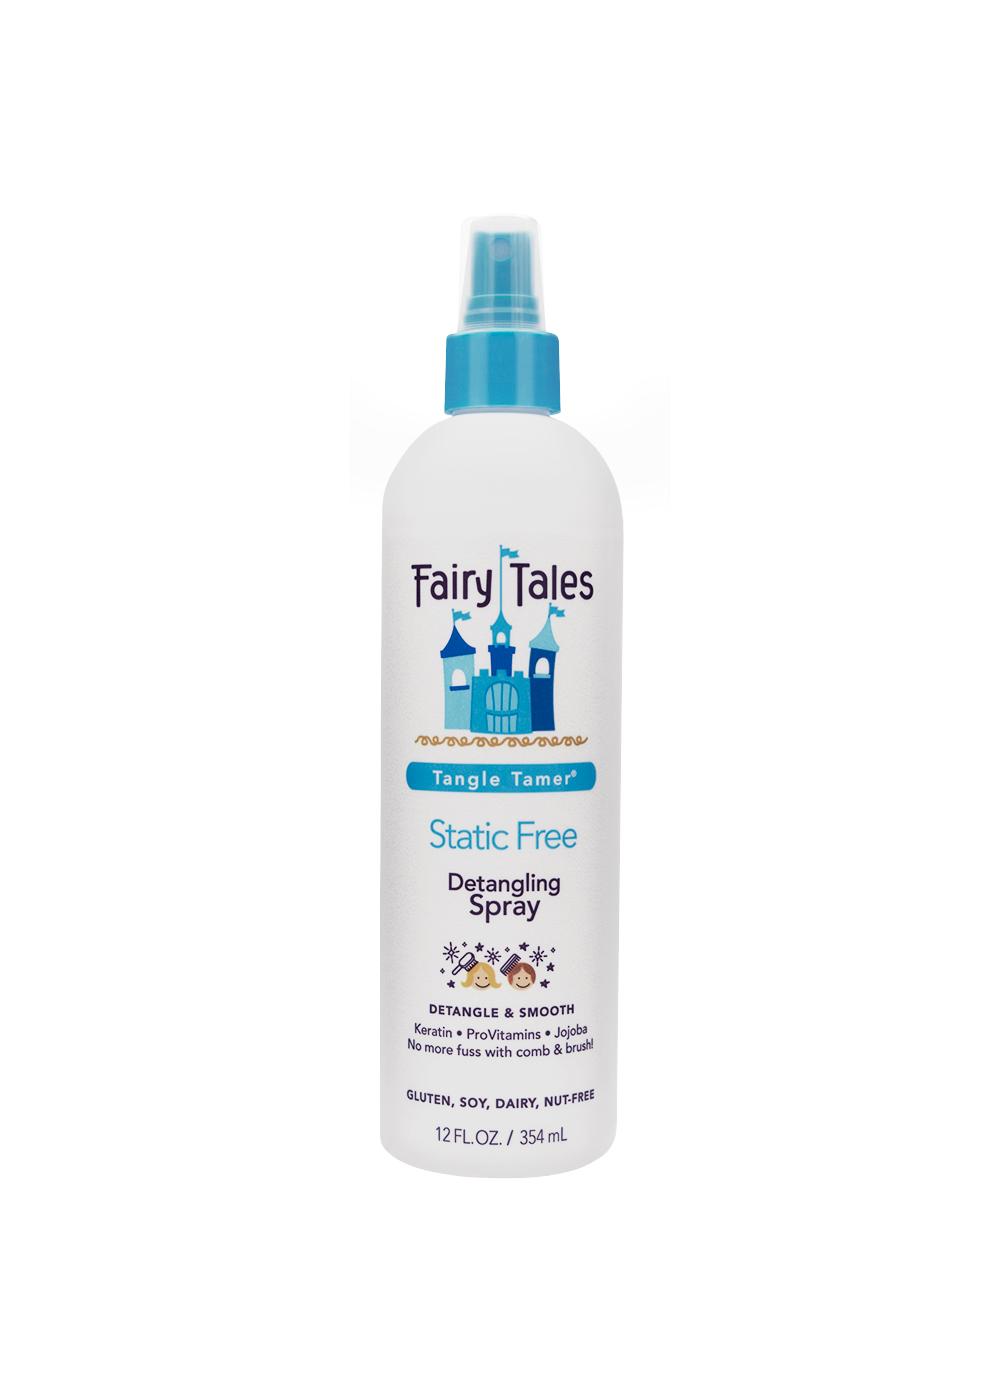 Fairy Tales Hair Care Tangle Tamer Static Free Detangling Spray; image 1 of 2